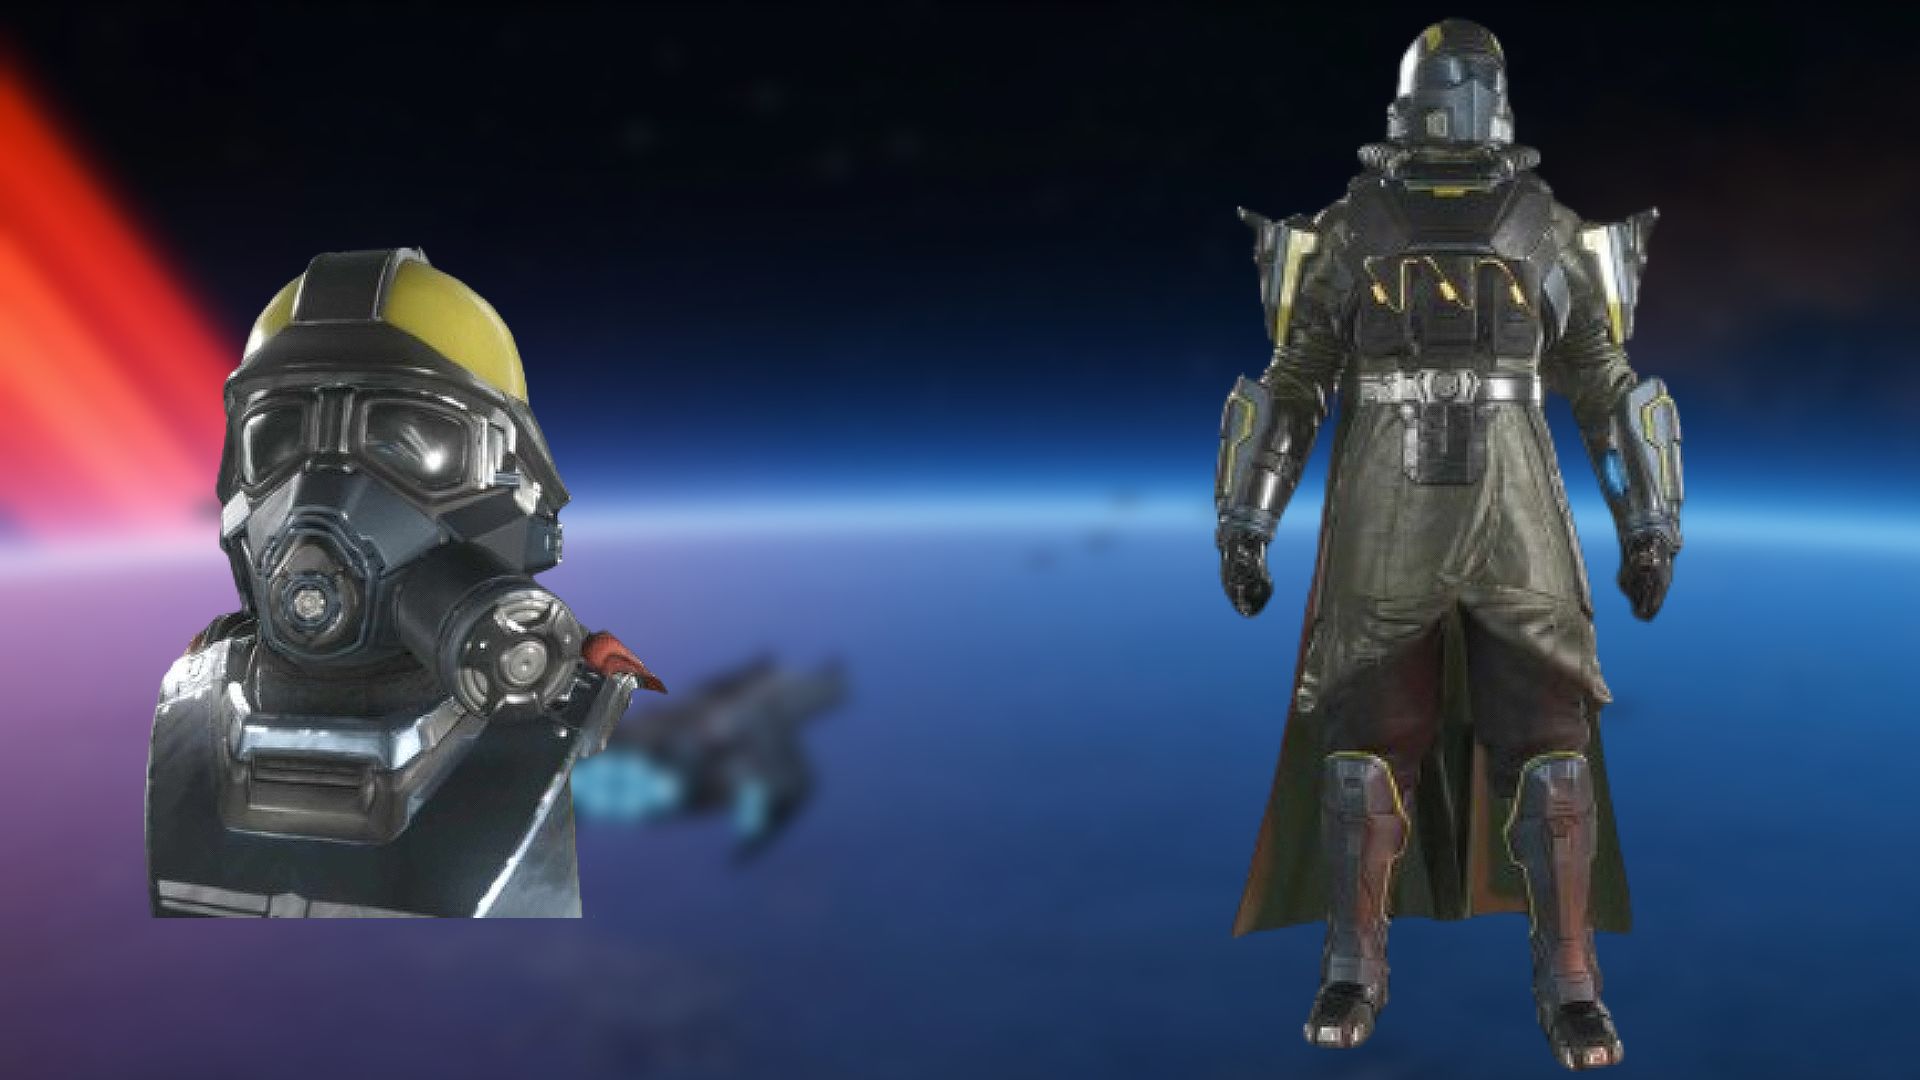 The CE-27 Ground Breaker Armor in Helldivers 2